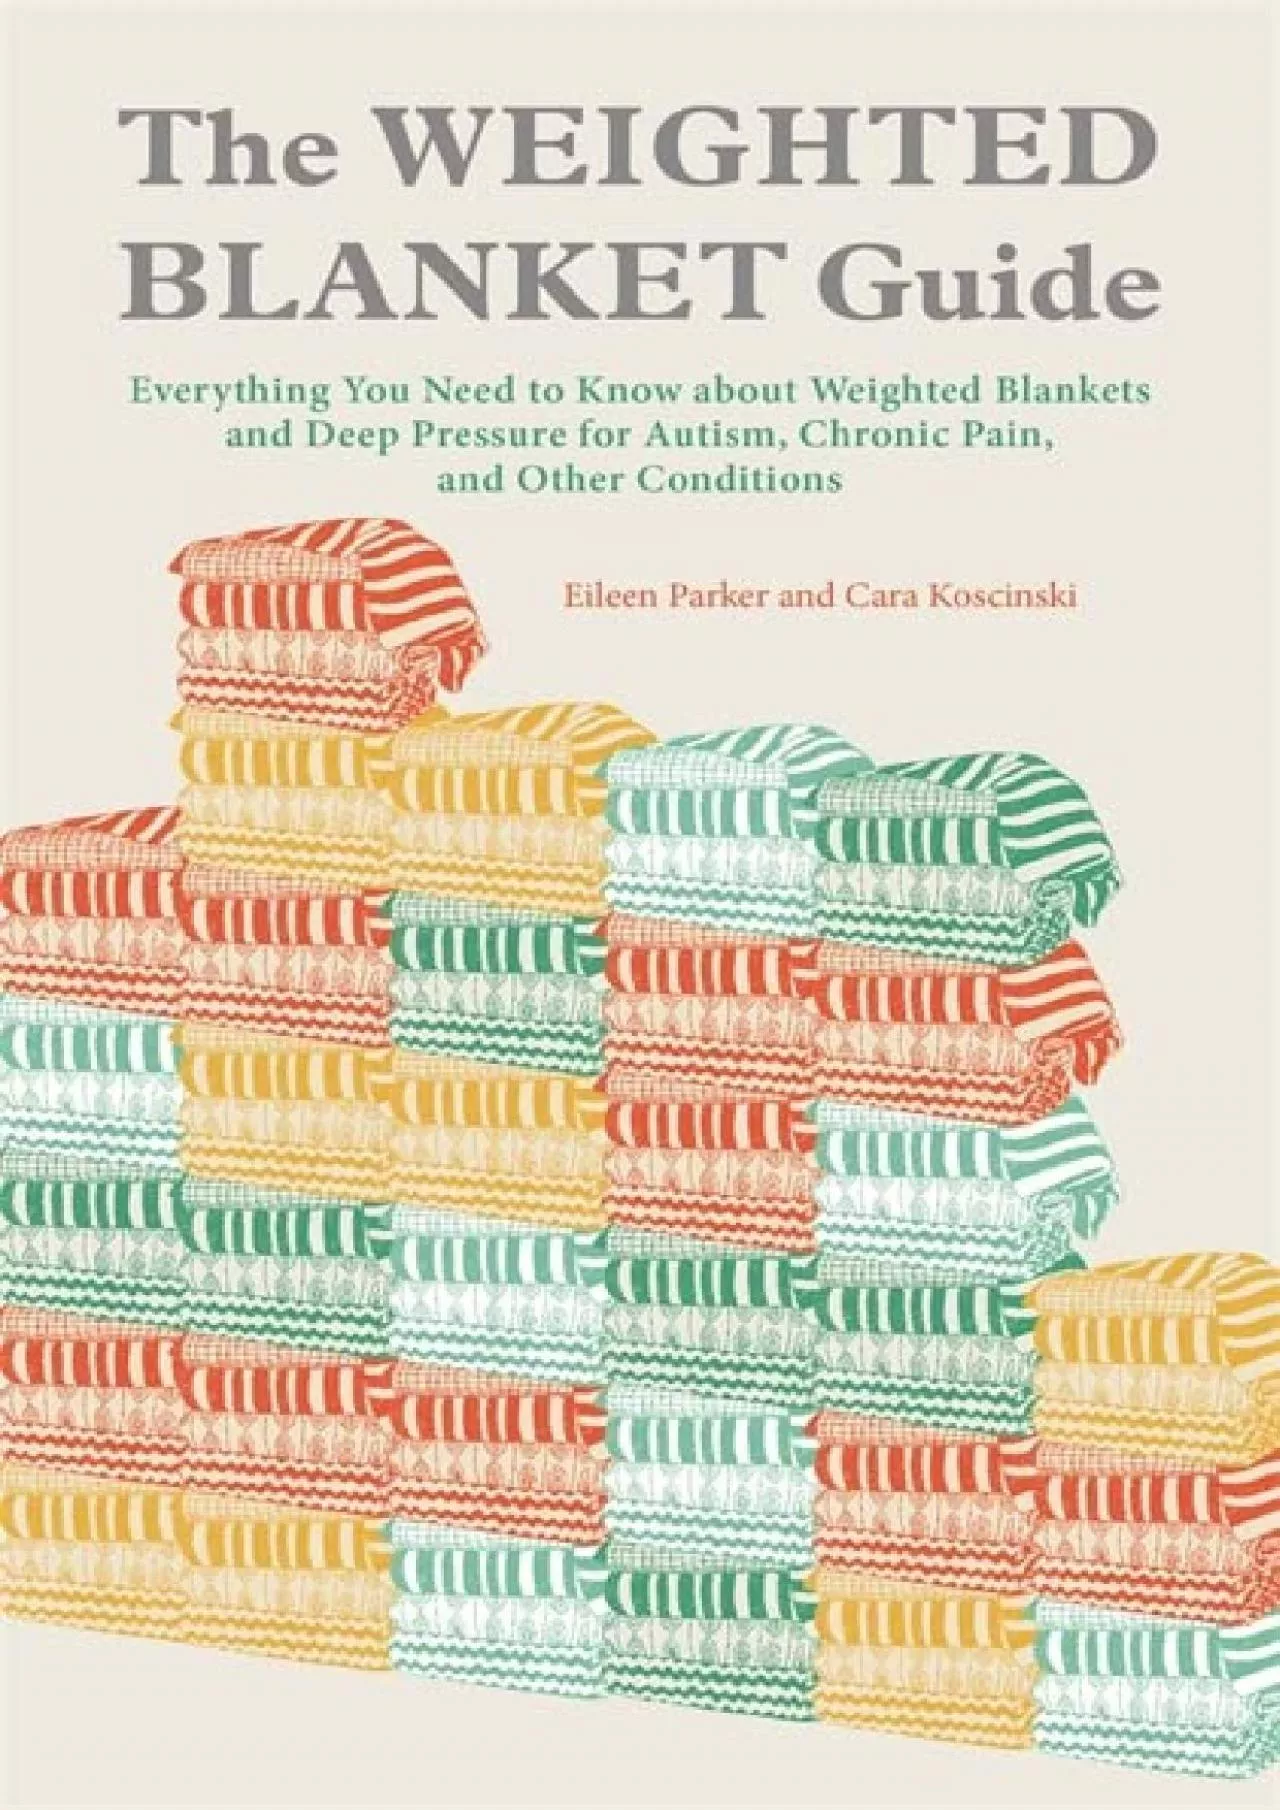 (EBOOK)-The Weighted Blanket Guide: Everything You Need to Know about Weighted Blankets